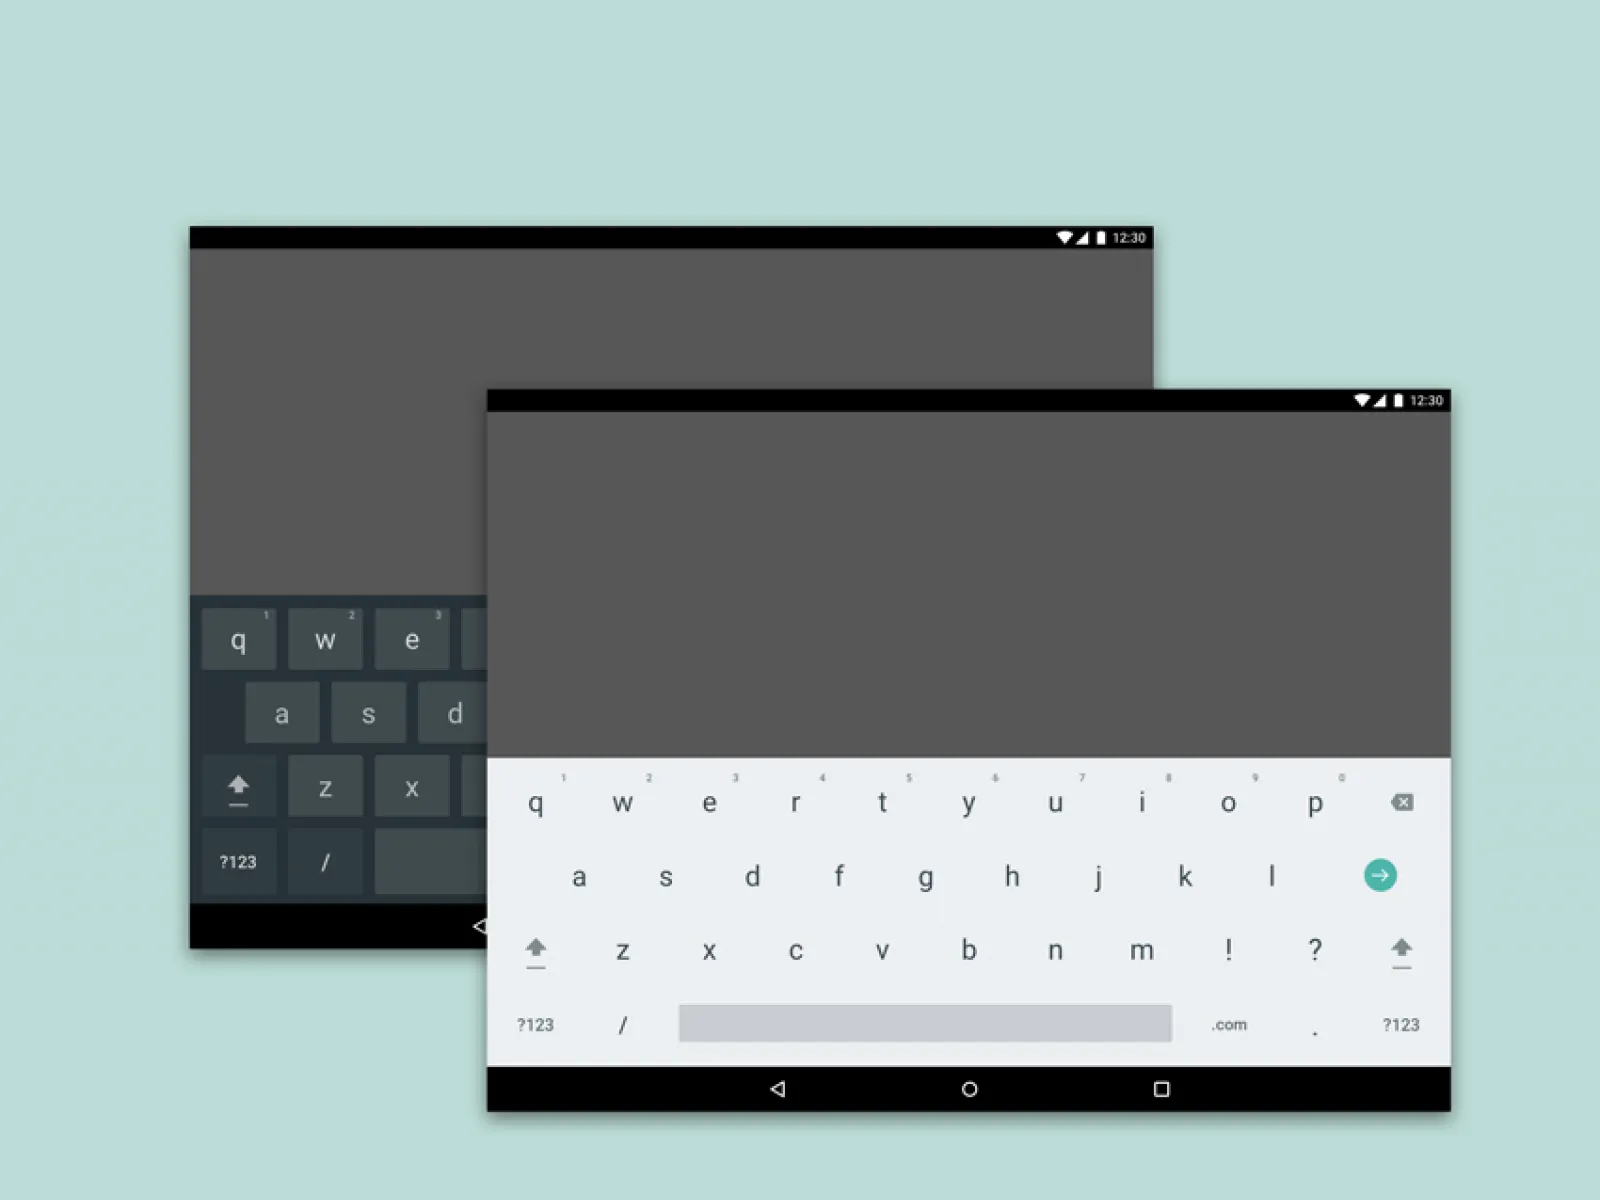 Android Tablet Keyboard for Figma and Adobe XD